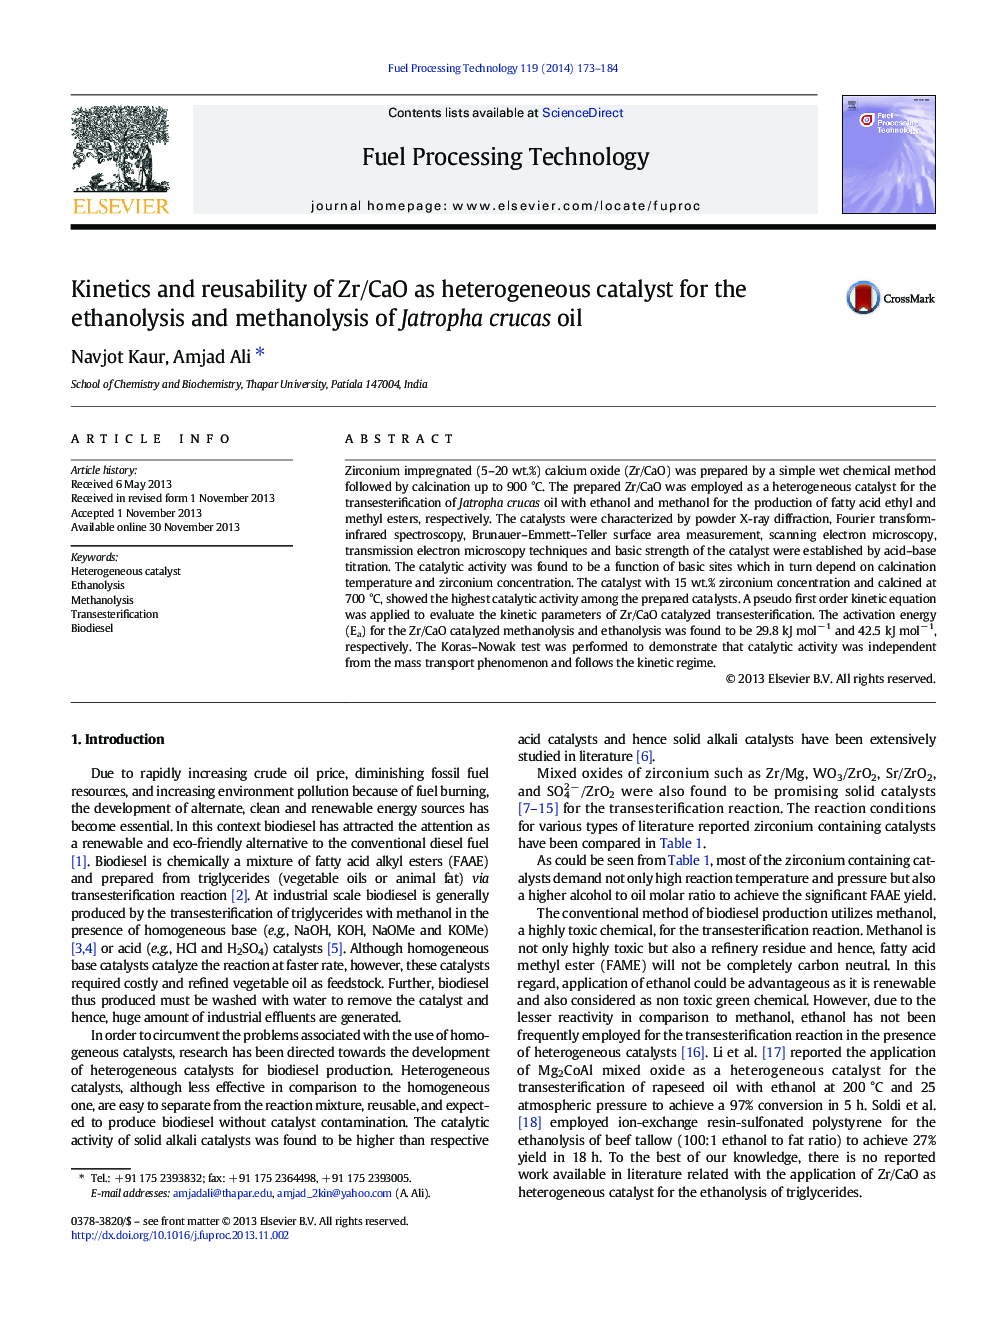 Kinetics and reusability of Zr/CaO as heterogeneous catalyst for the ethanolysis and methanolysis of Jatropha crucas oil